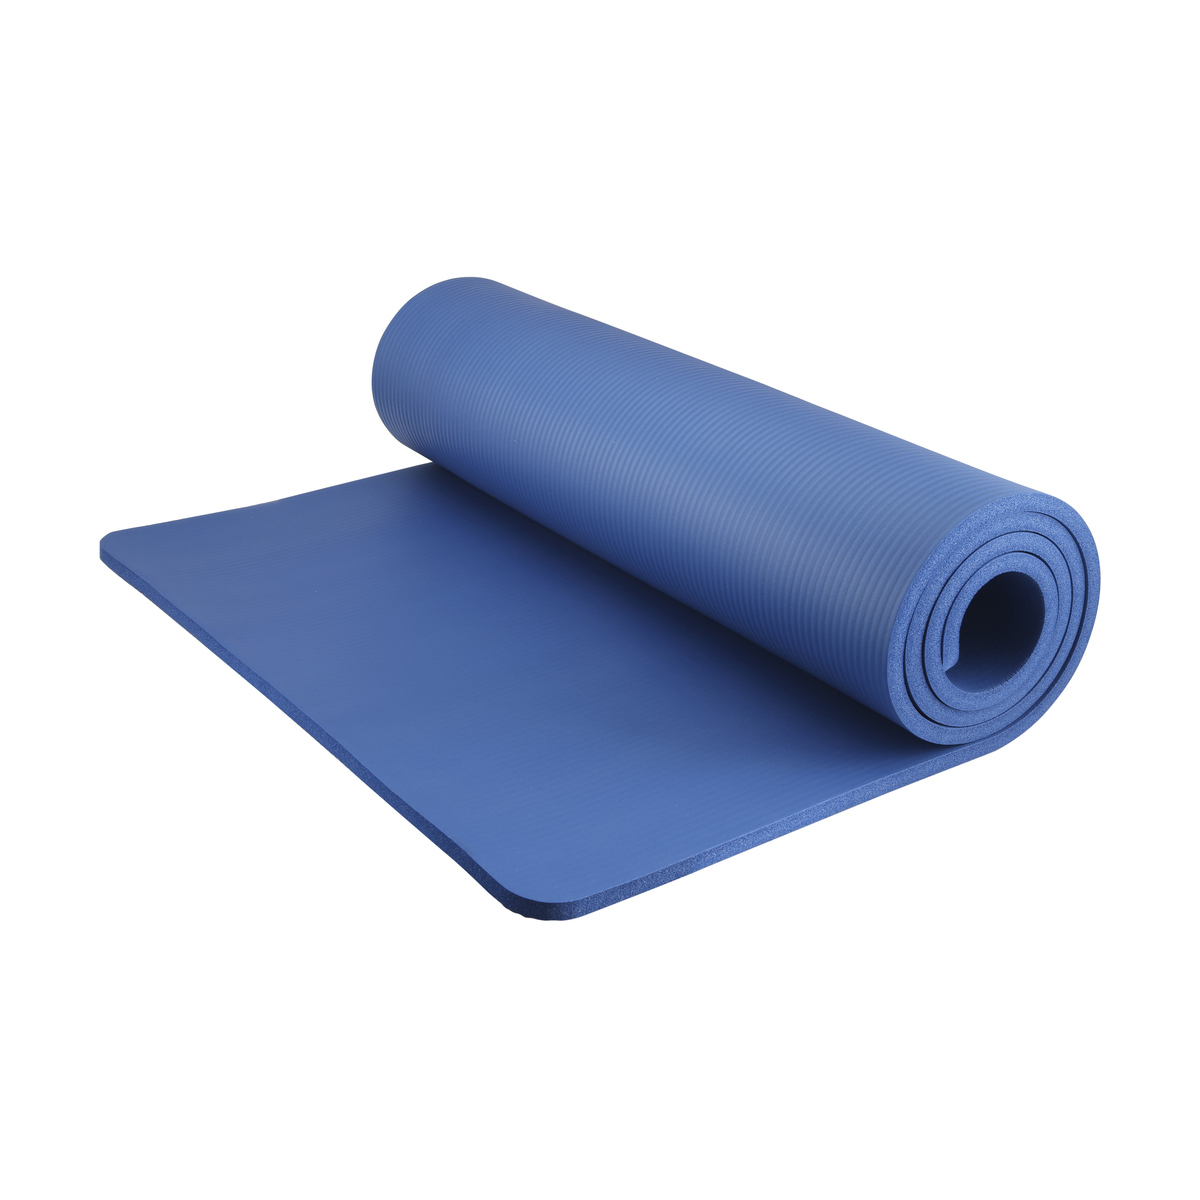 Yoga Mat Strap Kmart Stores  International Society of Precision Agriculture